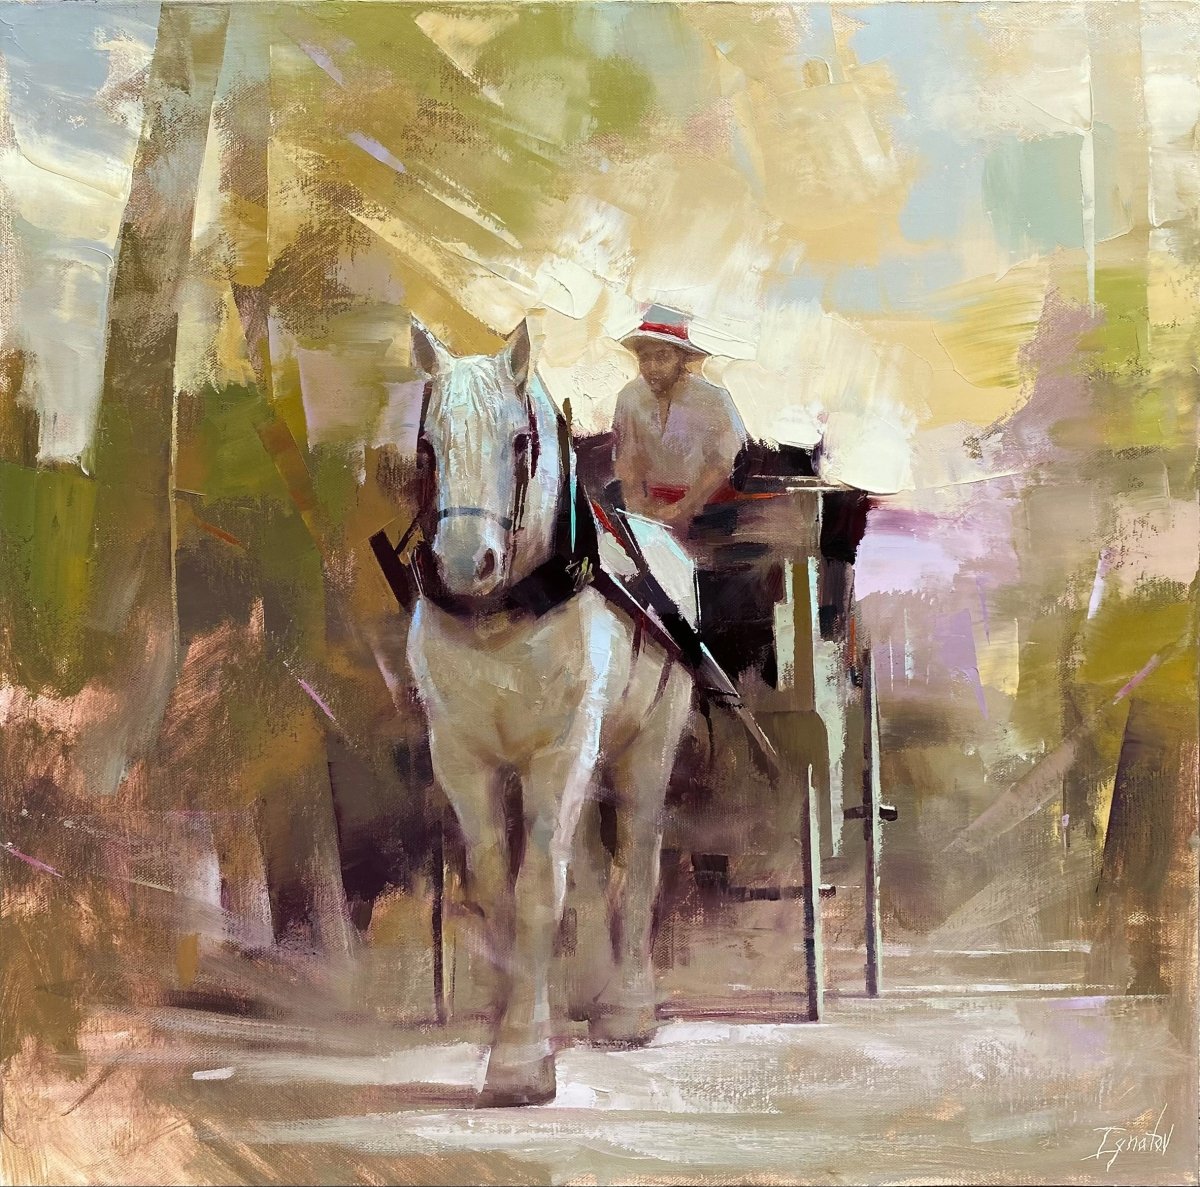 Downtown Afternoon by Ignat Ignatov at LePrince Galleries